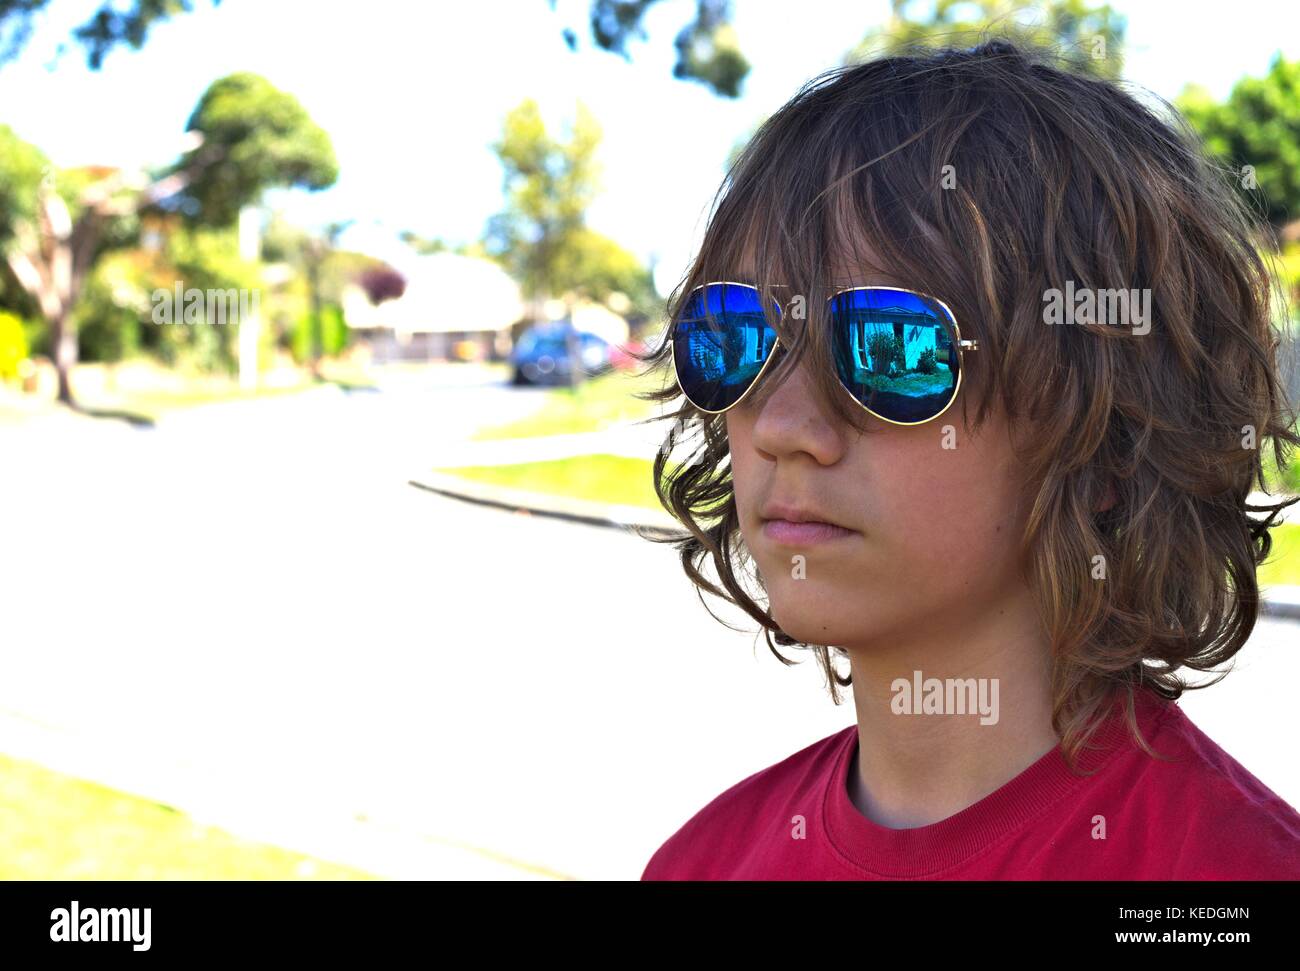 Young teenage male wearing blue sunglasses head shot against suburban background. Stock Photo